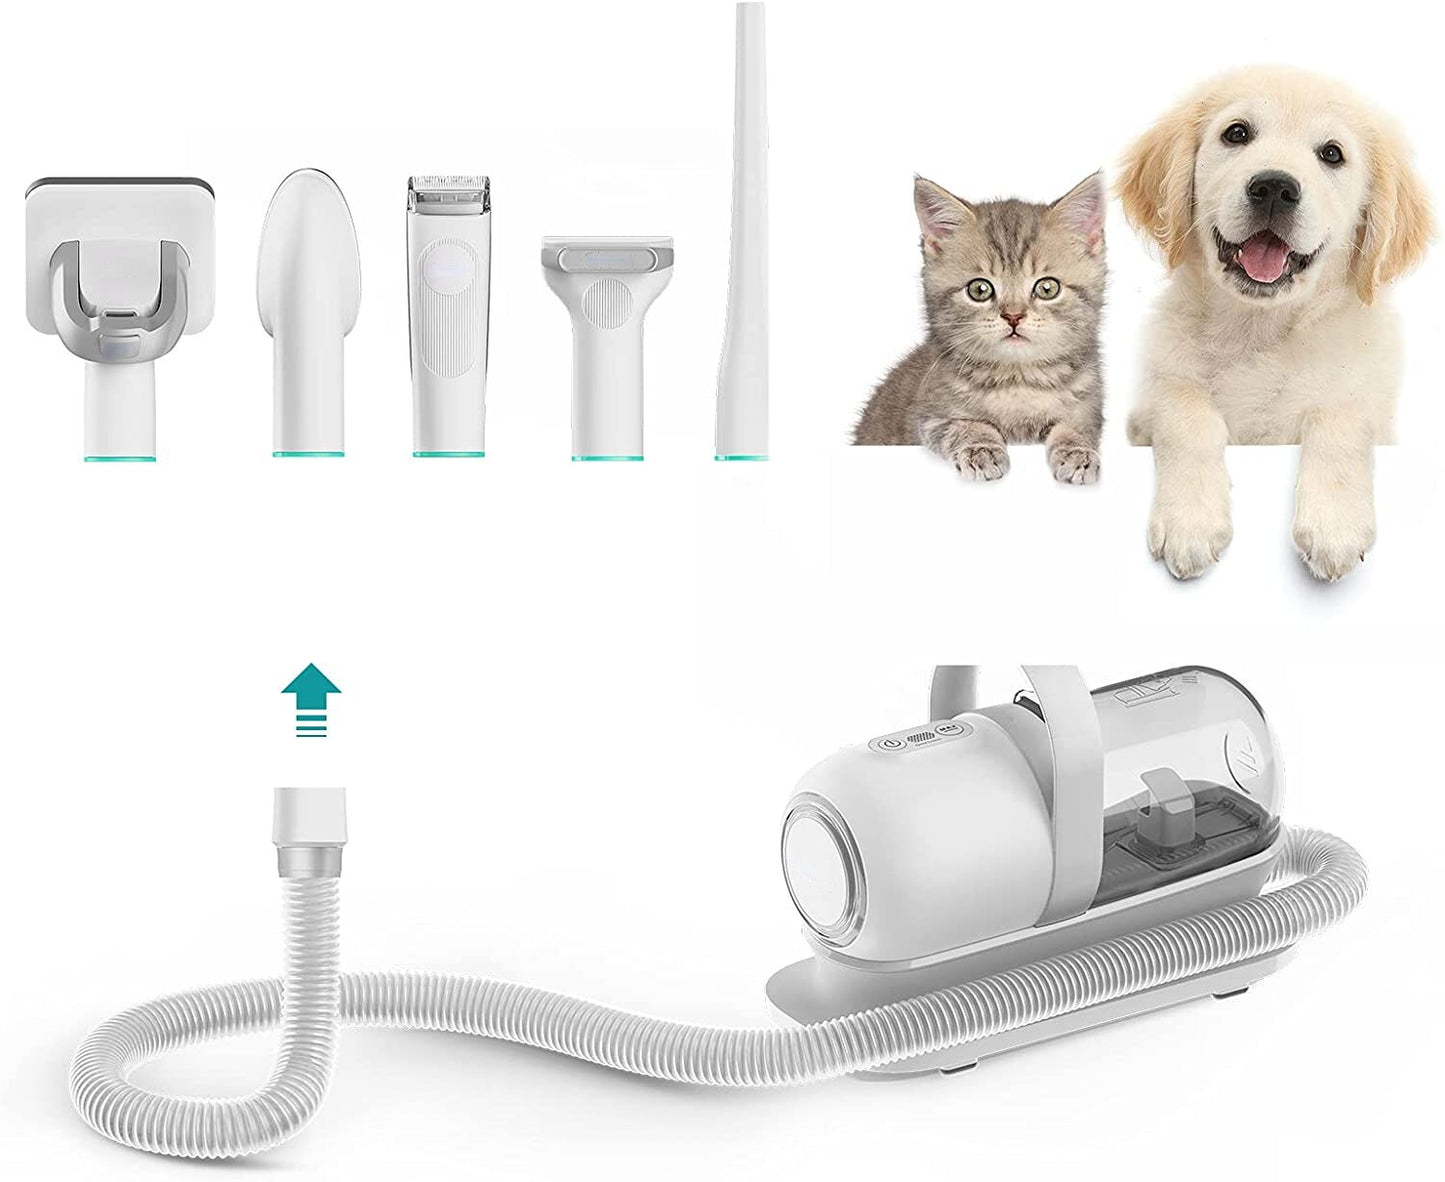 Pet Grooming Kit & Vacuum Suction with 5 Proven Grooming Tools for Dogs Cats or Other Animals